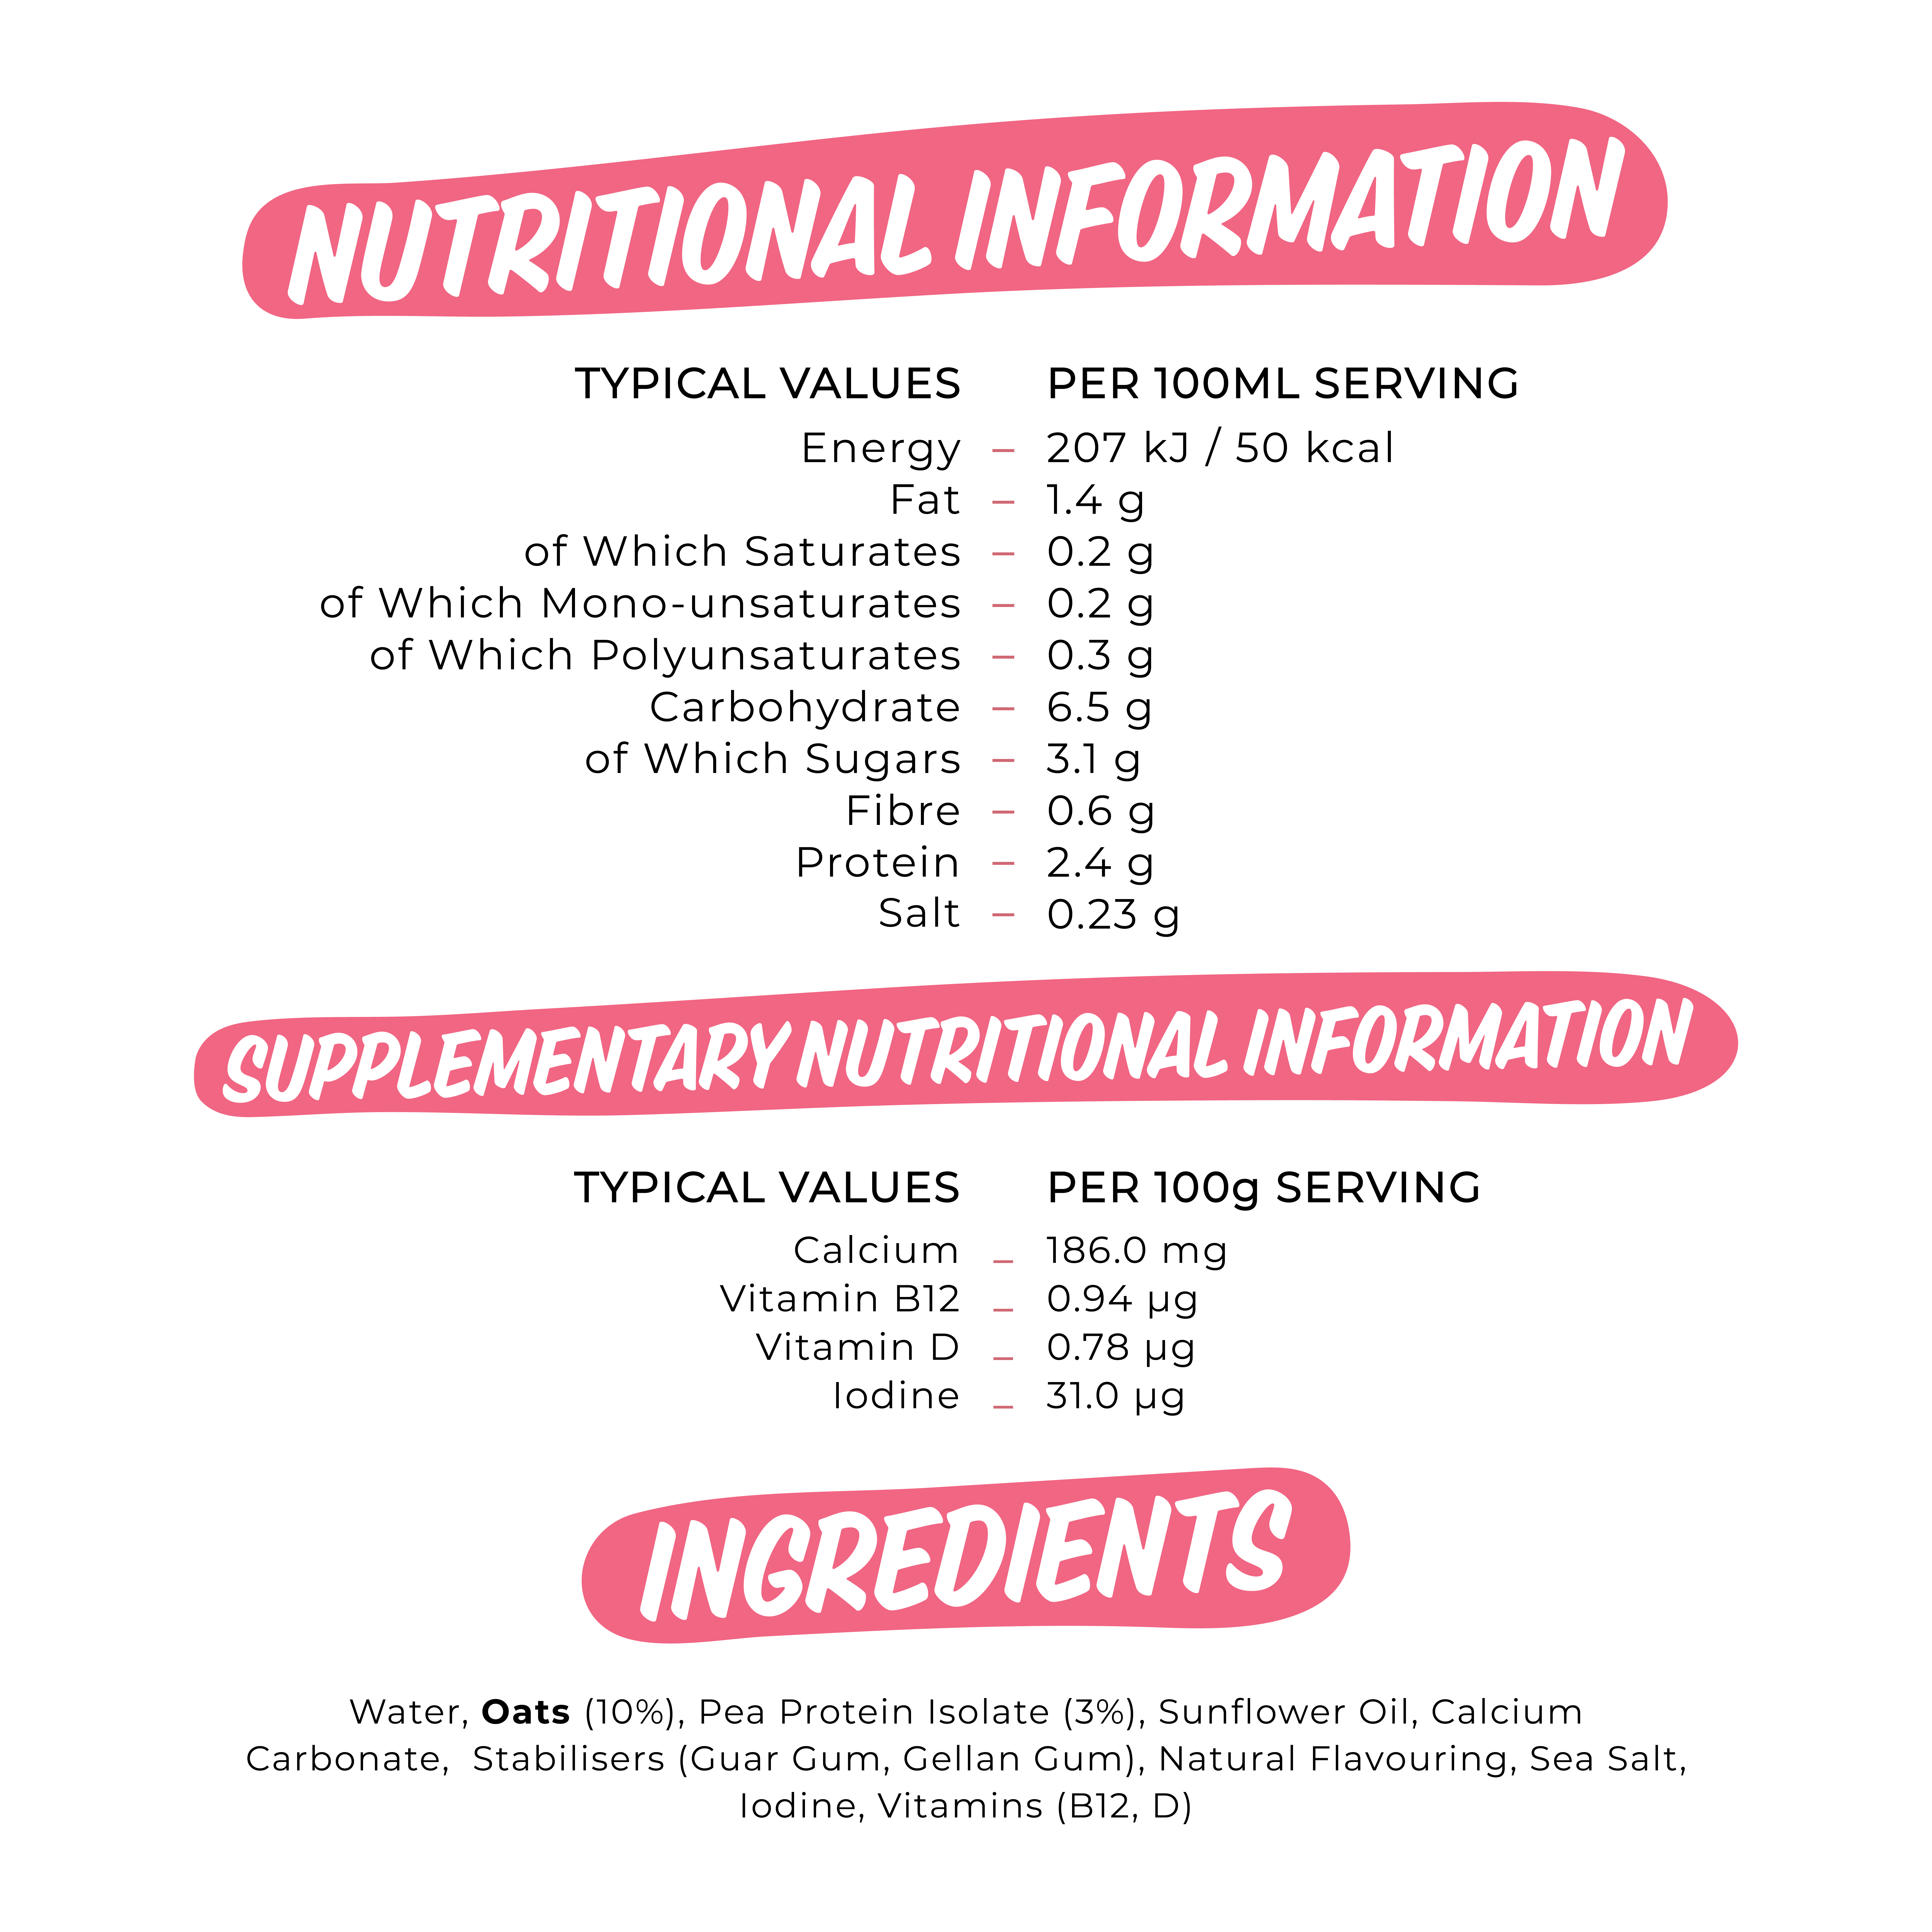 TYPICAL VALUES PER 100ML SERVING Energy 207 kJ / 50 kcal Fat 1.4 g of Which Saturates 0.2 g of Which Mono-unsaturates 0.2 g of Which Polyunsaturates 0.3 g Carbohydrate 6.5 g of Which Sugars 3.1 g Fibre 0.6 g Protein 2.4 g Salt . 0.23 g 
                                  SUPPLEMENTARY NUTRITIONAL INFORMATION 
                                  TYPICAL VALUES PER 100g SERVING Calcium 186.0 mg Vitamin B12 0.94 pg Vitamin D 0.78 pg Iodine 31.0 pg 

                                  Water, Oats (10%), Pea Protein Isolate (3%), Sunflower Oil, Calcium Carbonate, Stabilisers (Guar Gum, Gellan Gum), Natural Flavouring, Sea Salt, Iodine, Vitamins (B12, D) 

                                  